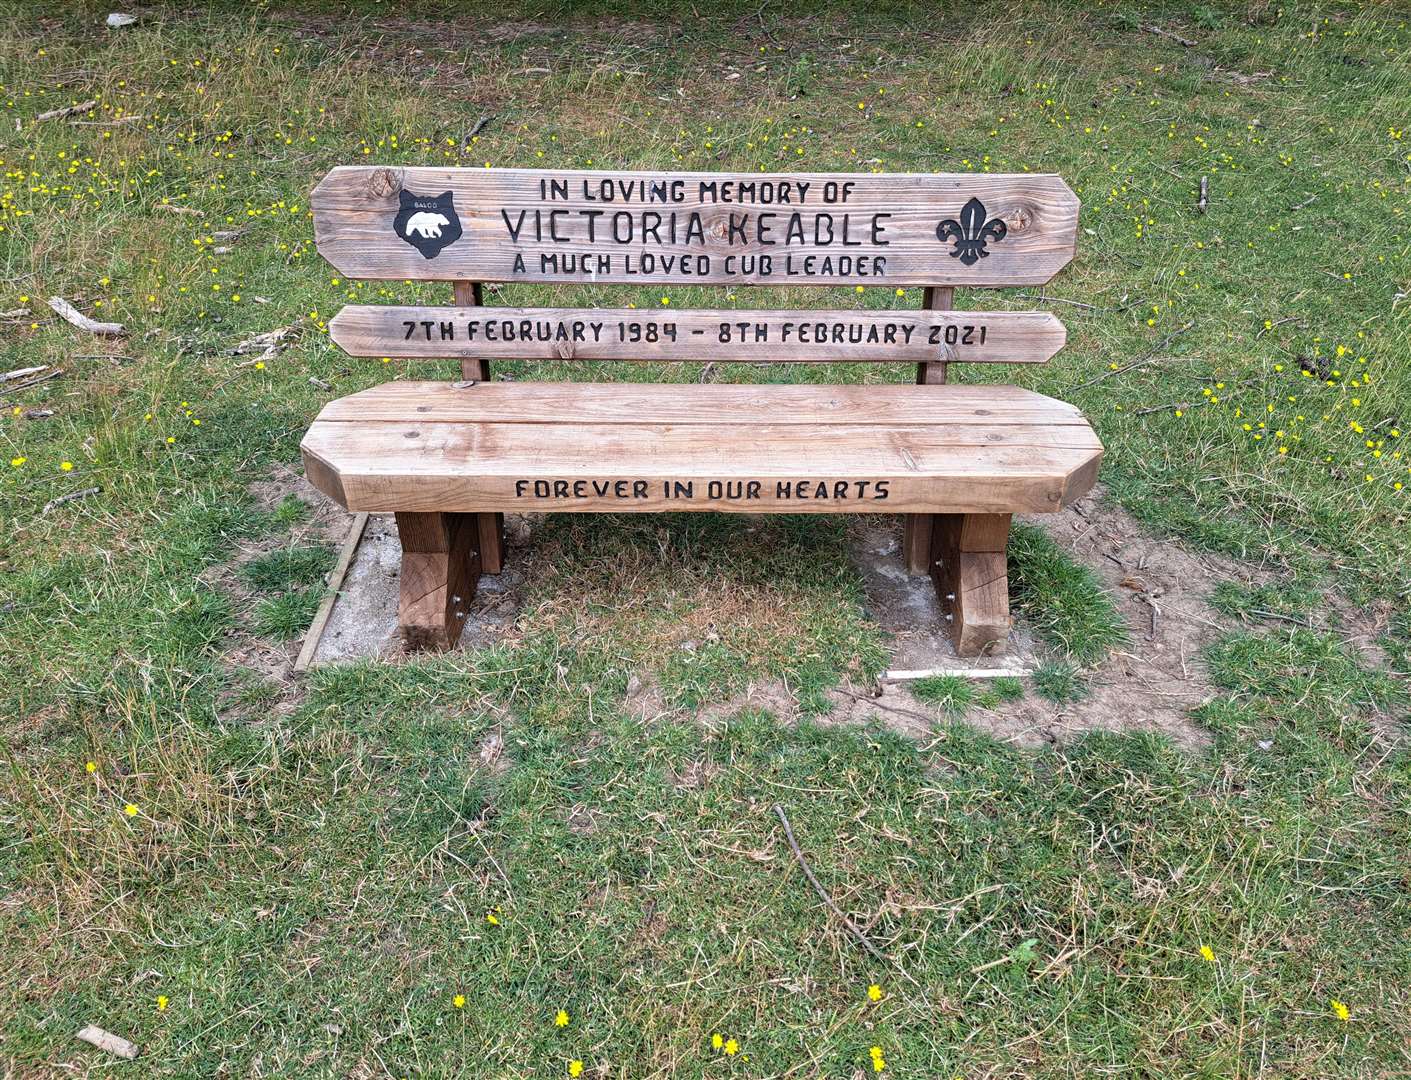 A bench placed to the memory of Cub Leader Victoria Keable